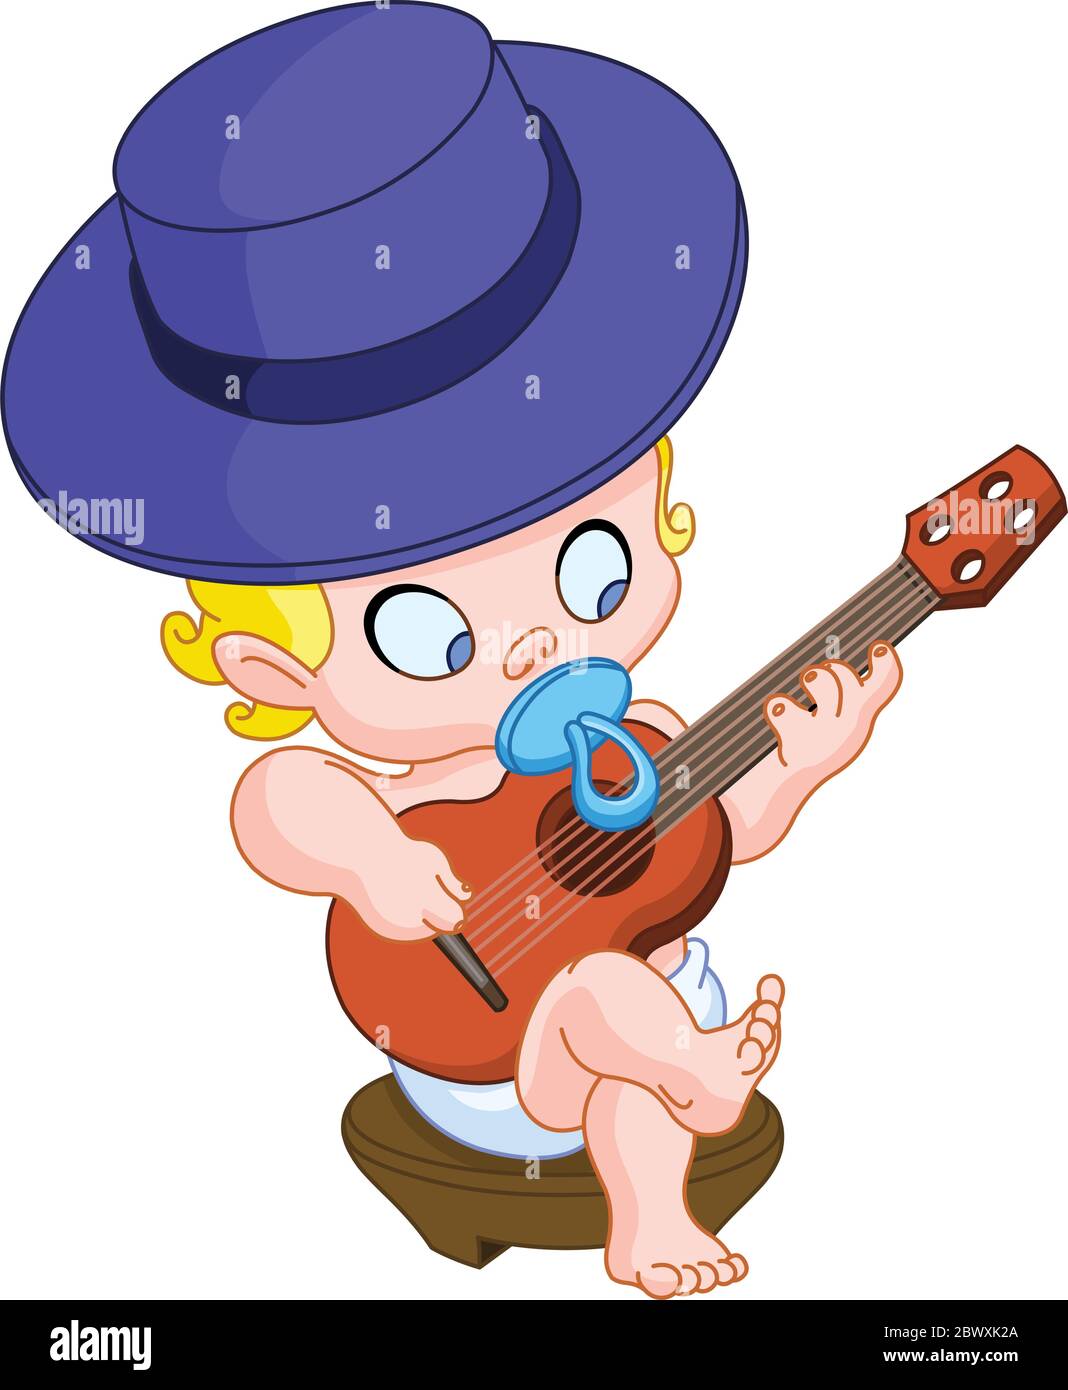 Cute baby playing guitar Stock Vector